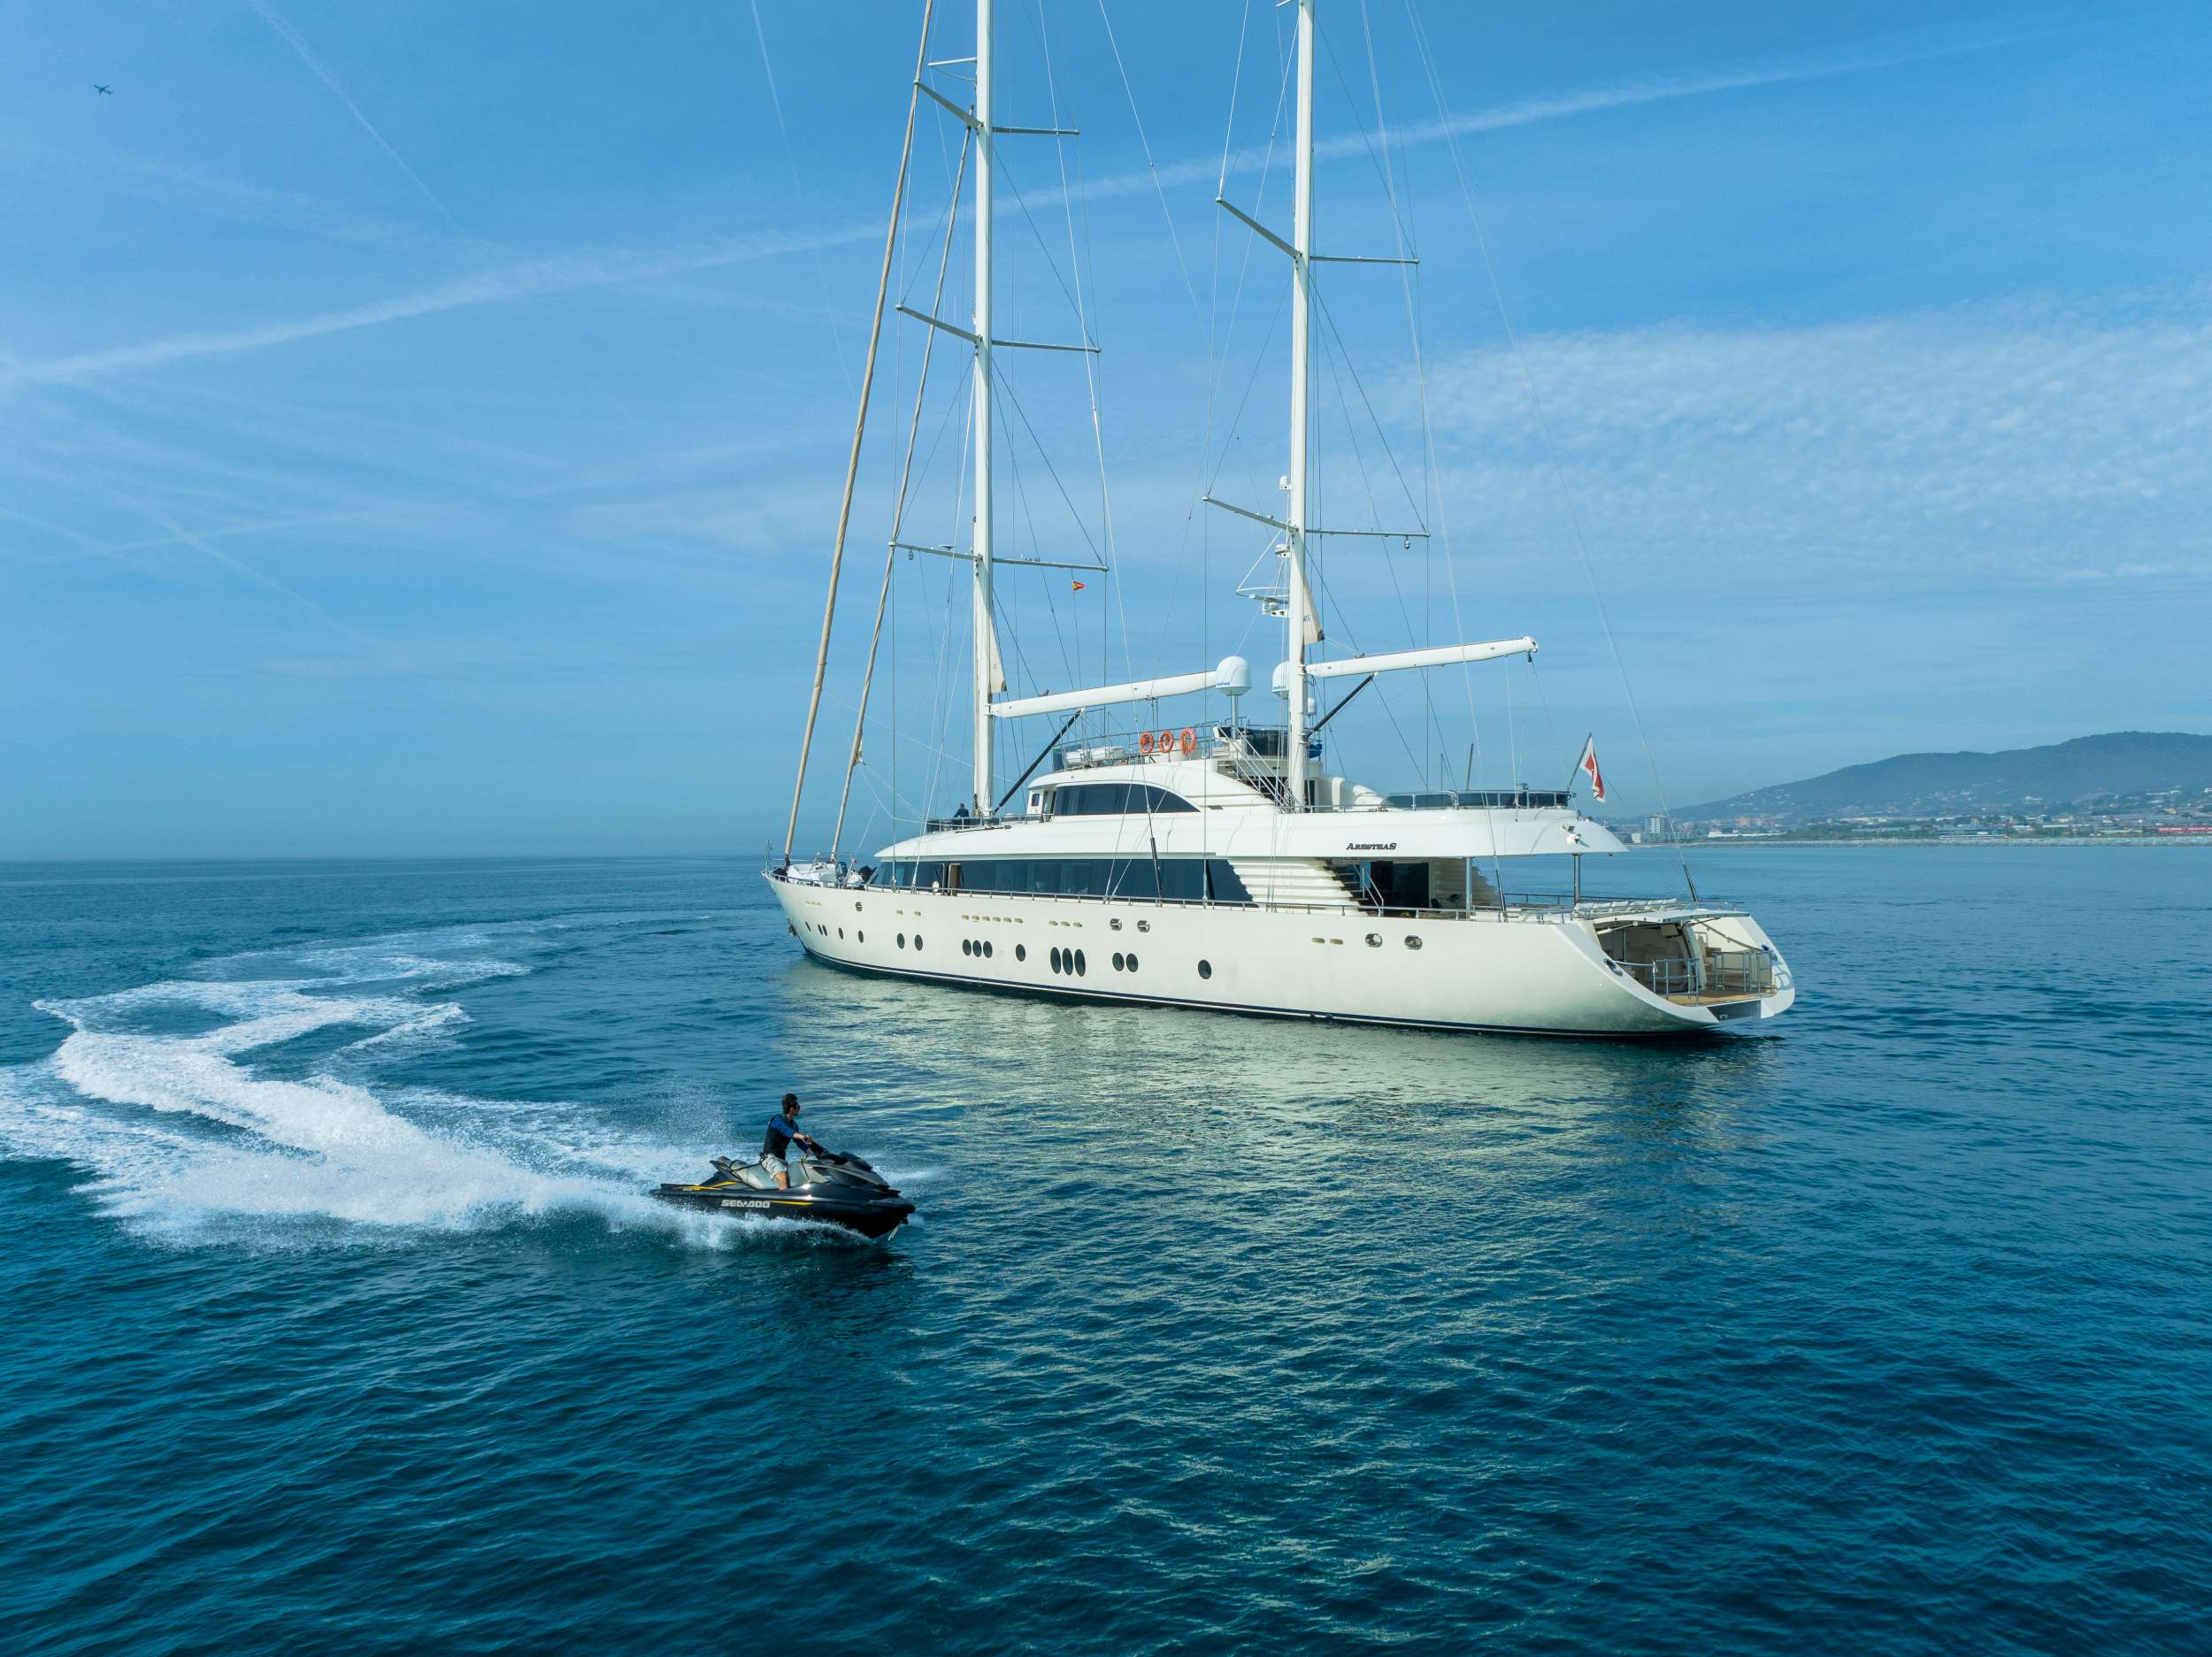 ARESTEAS - Yacht Charter Alcudia & Boat hire in W. Med -Naples/Sicily, W. Med -Riviera/Cors/Sard., W. Med - Spain/Balearics 1